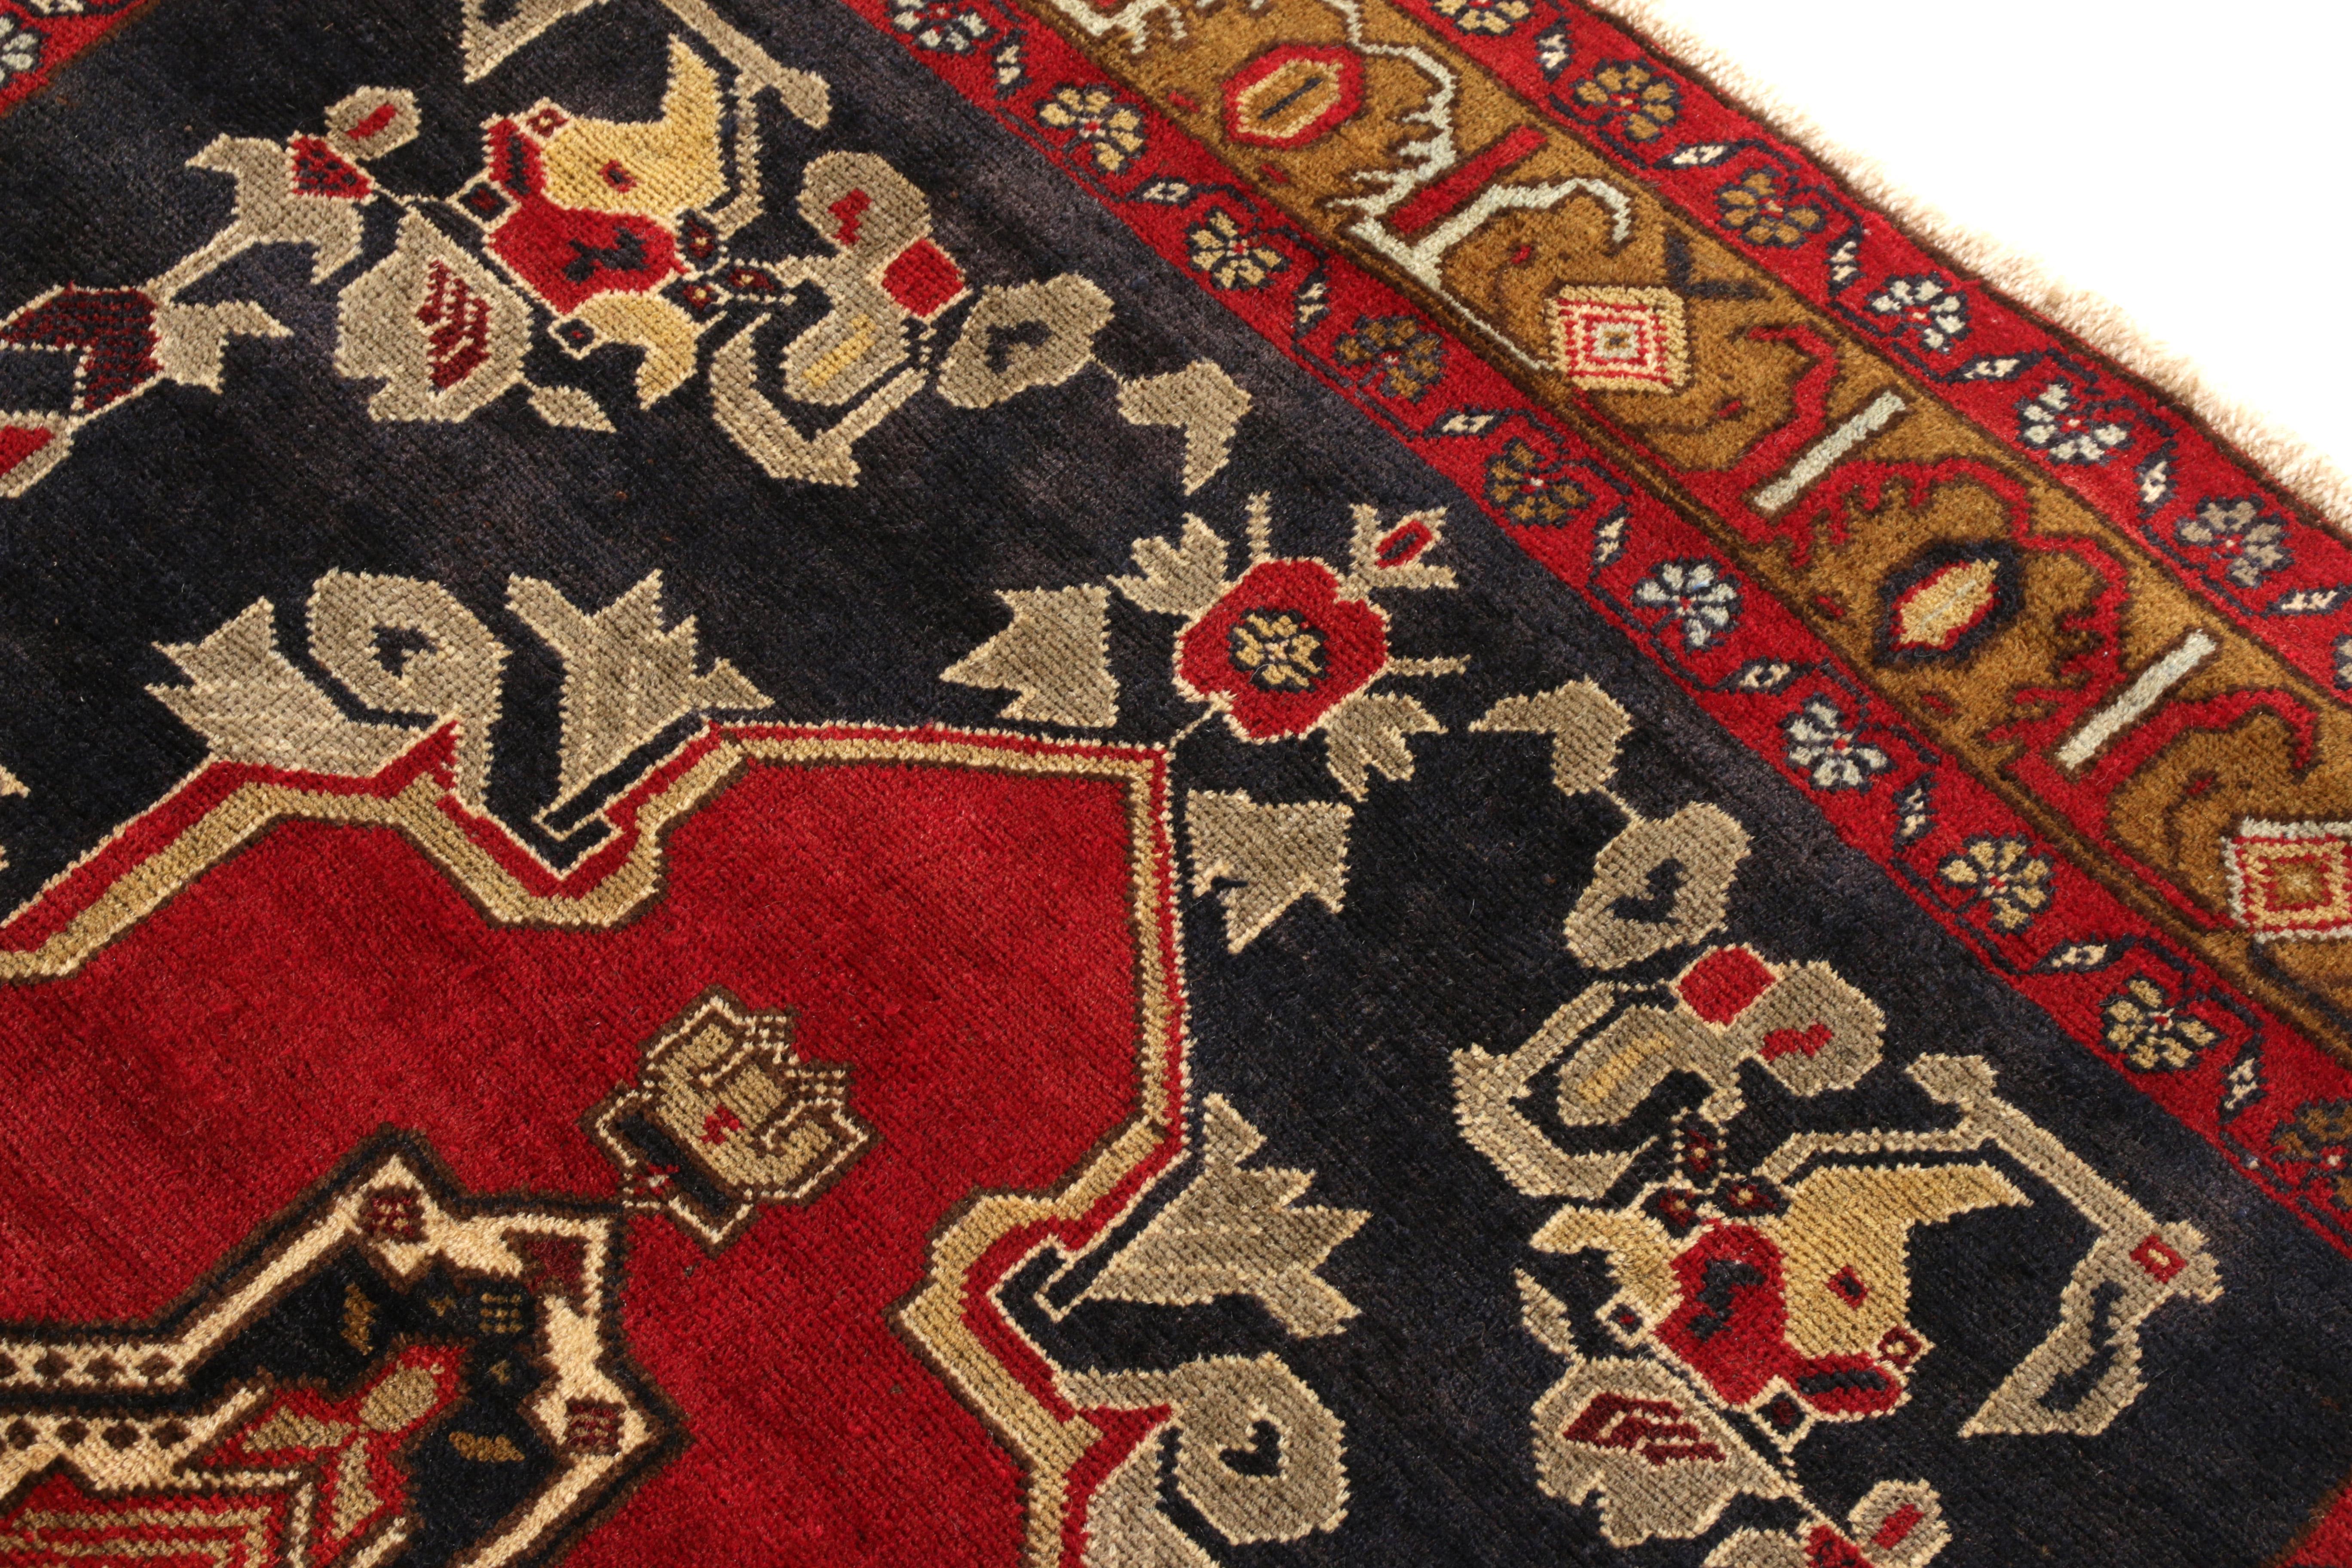 Turkish Hand-Knotted Vintage Rug in Red, Multicolor Medallion Pattern by Rug & Kilim For Sale